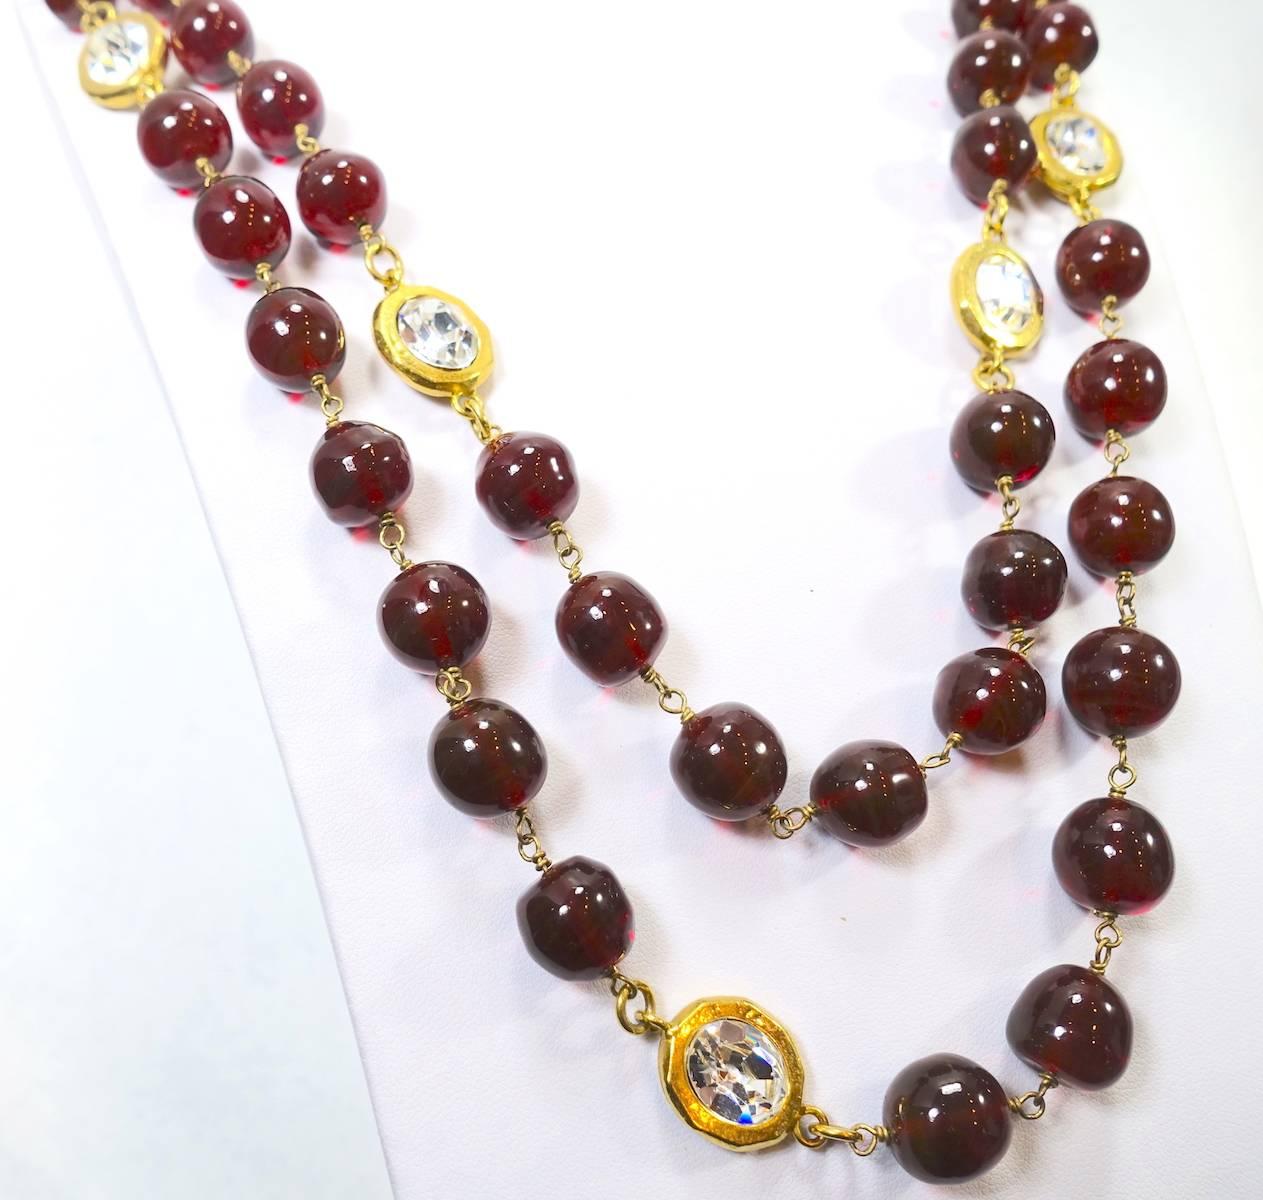 This vintage signed Chanel necklace features the famous cranberry Gripoix glass beads with crystal accents in a gold-tone setting.  This sautoir necklace measures 60” x 1/2”, is signed ‘Chanel Made in France” and is in excellent condition.